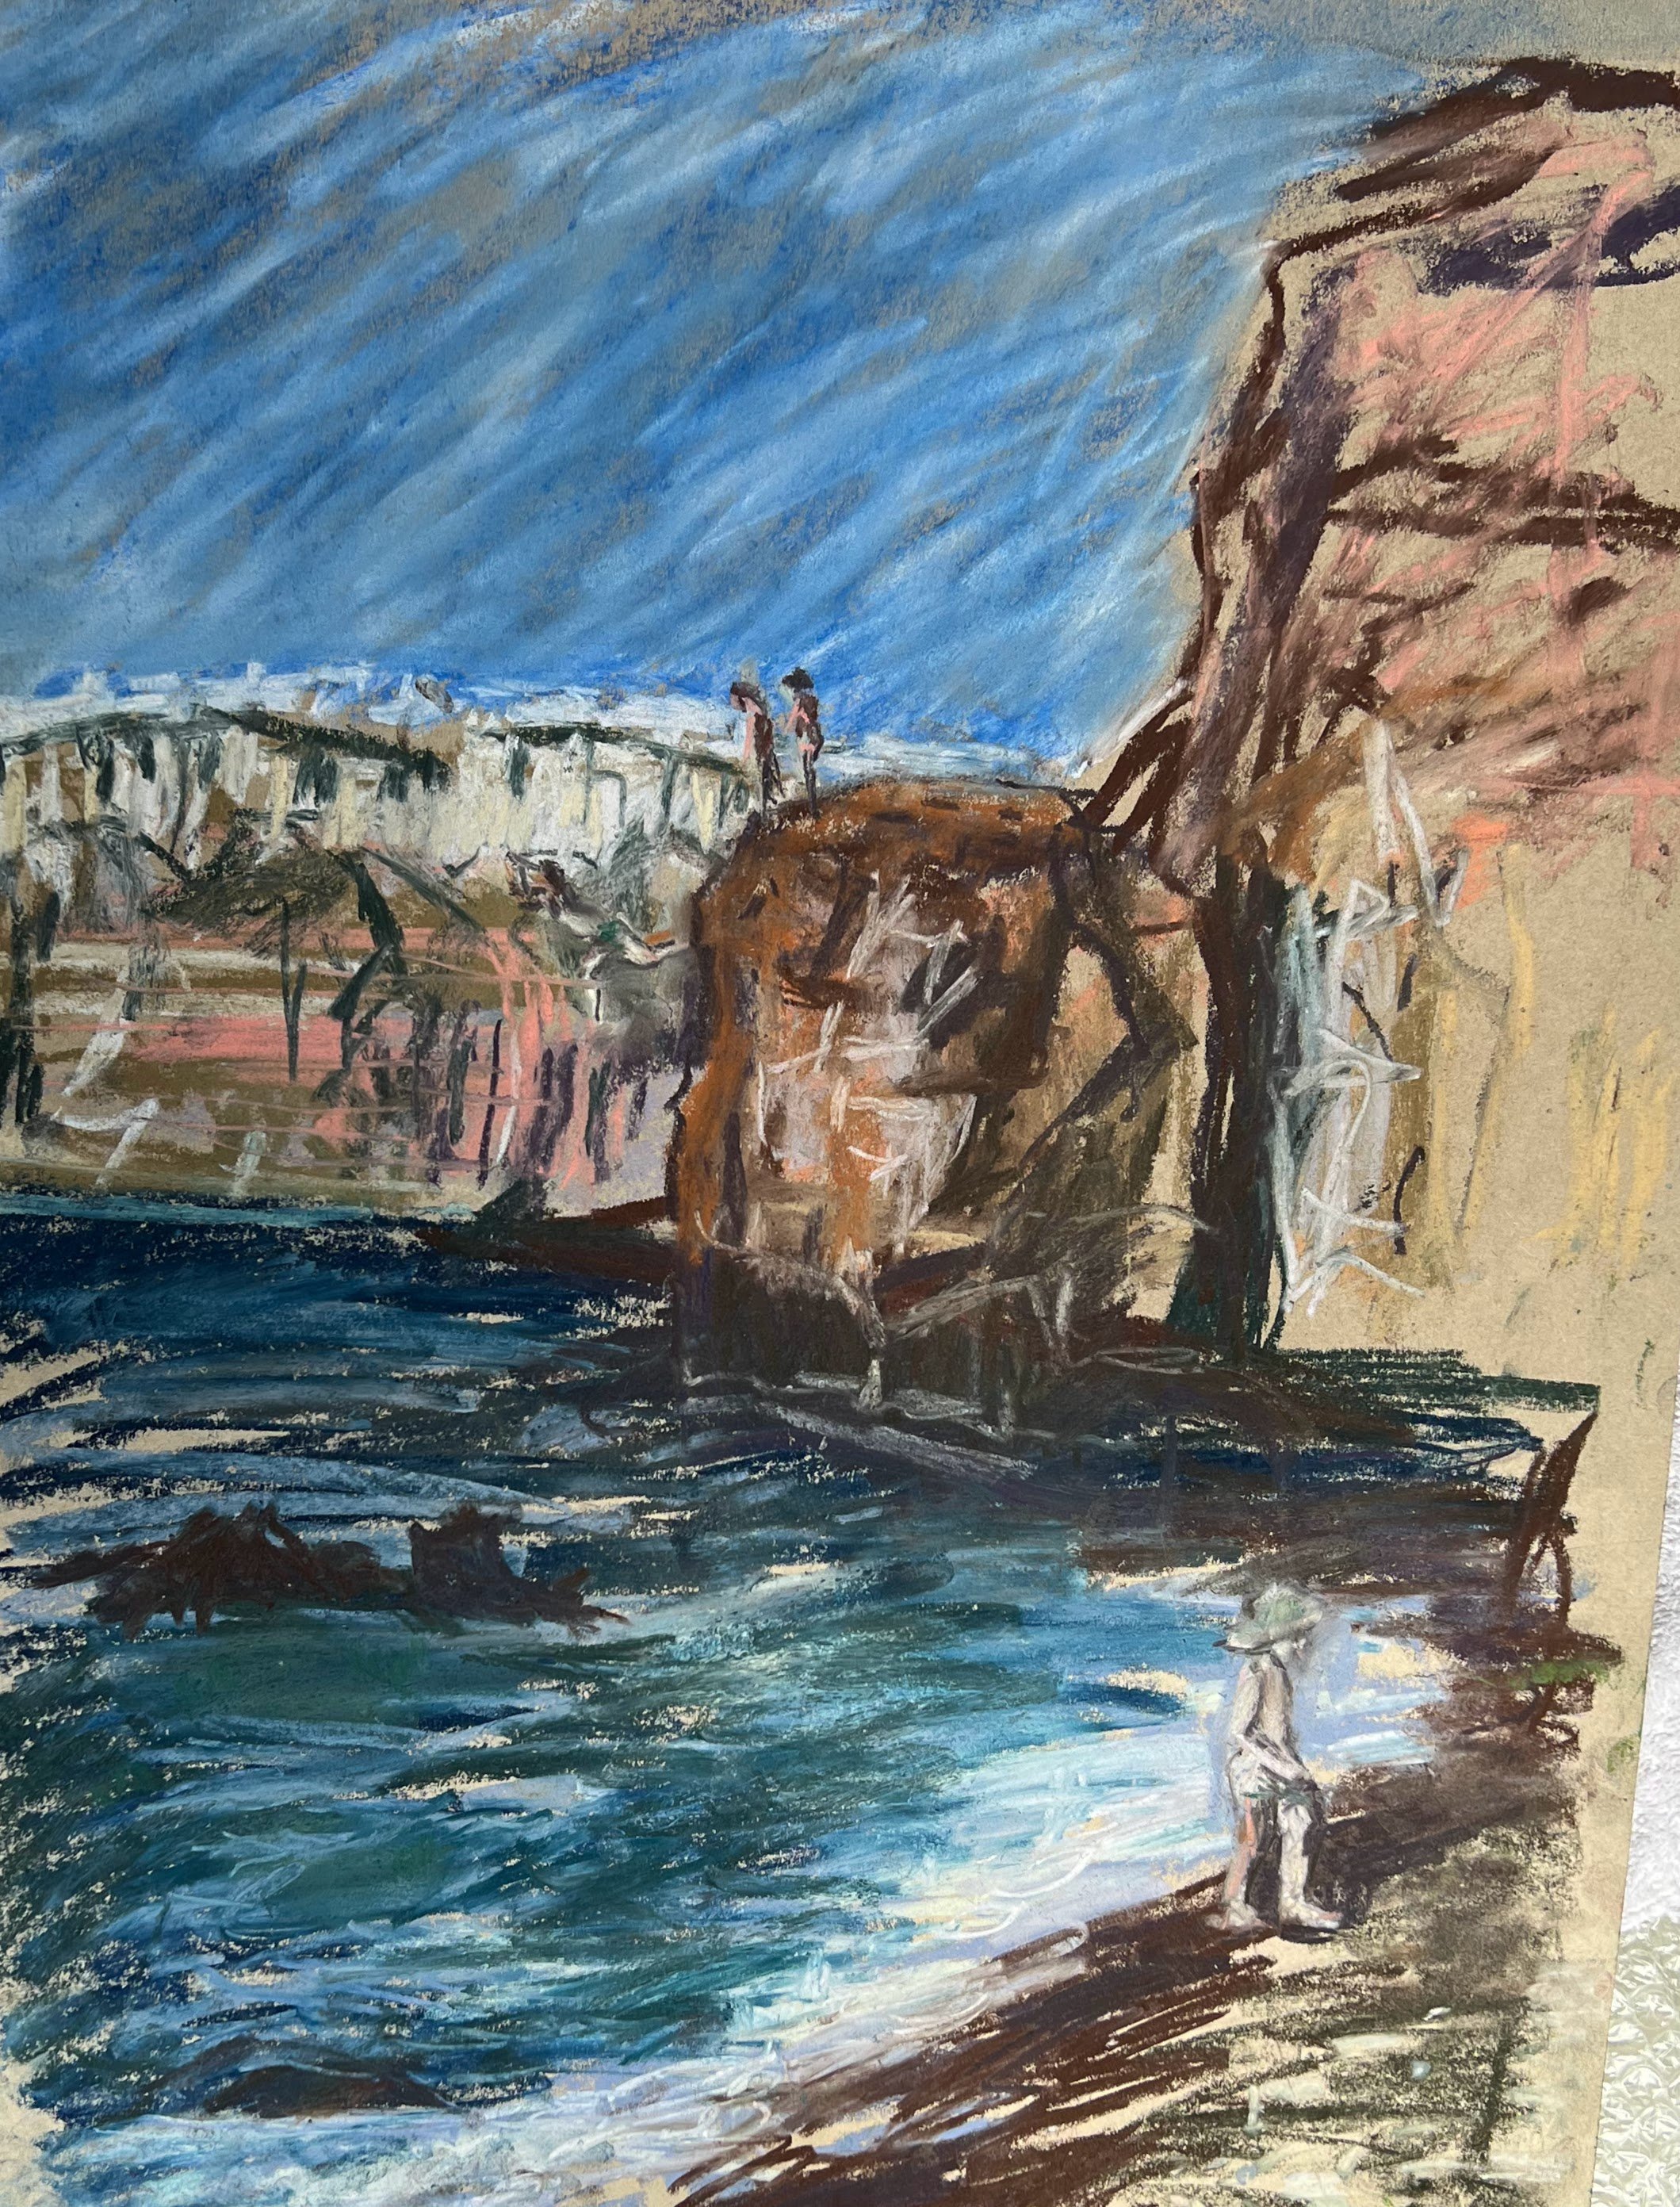  preliminary sketch in Santorini of volcanic beach when I was watching people jumping off cliff, later worked up into an oil painting (also posted here) 